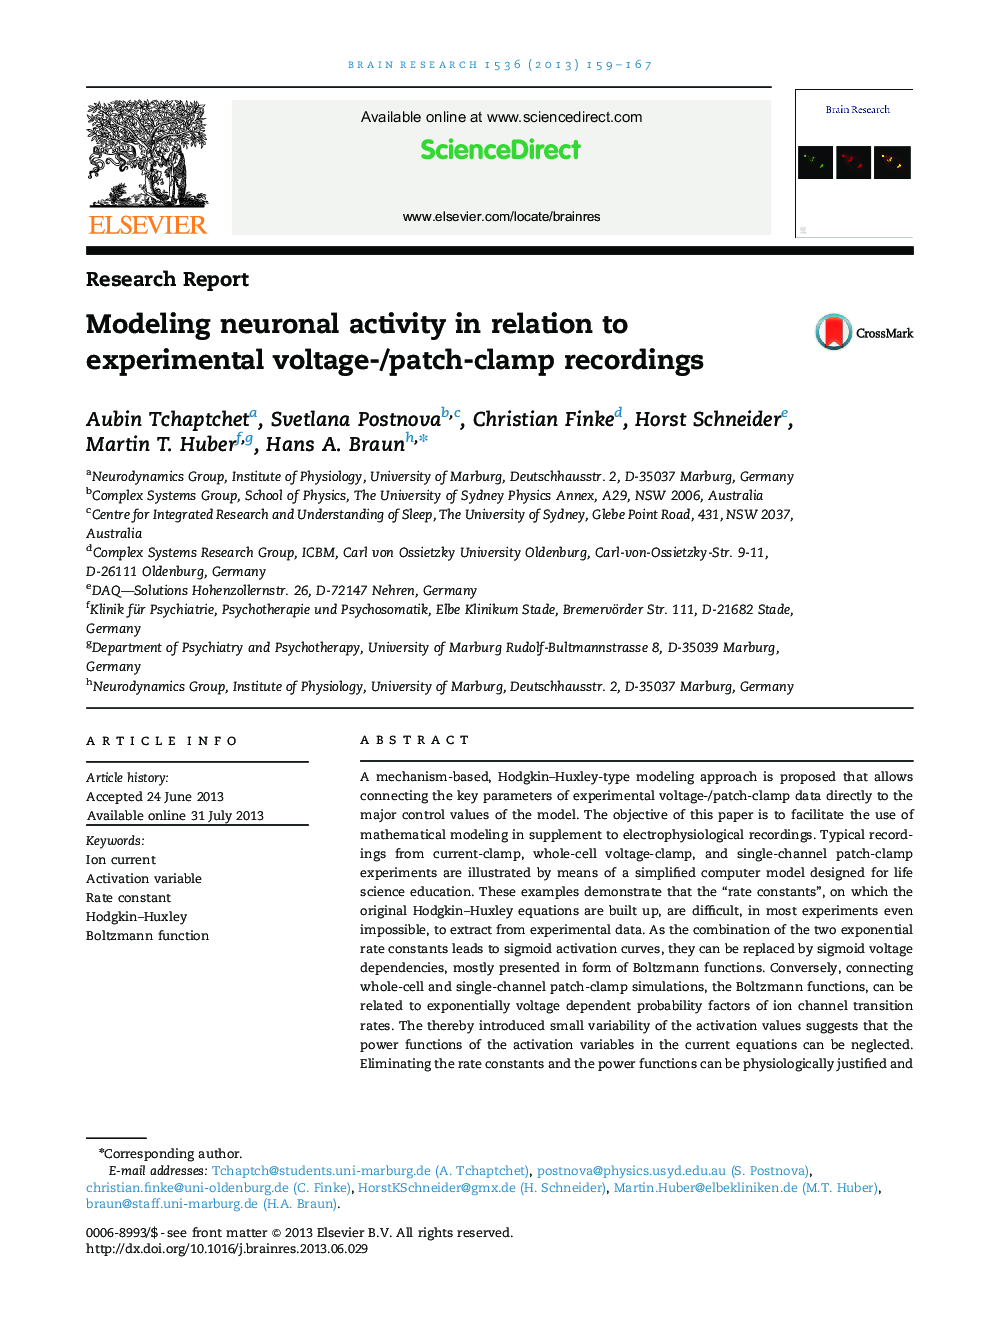 Research ReportModeling neuronal activity in relation to experimental voltage-/patch-clamp recordings